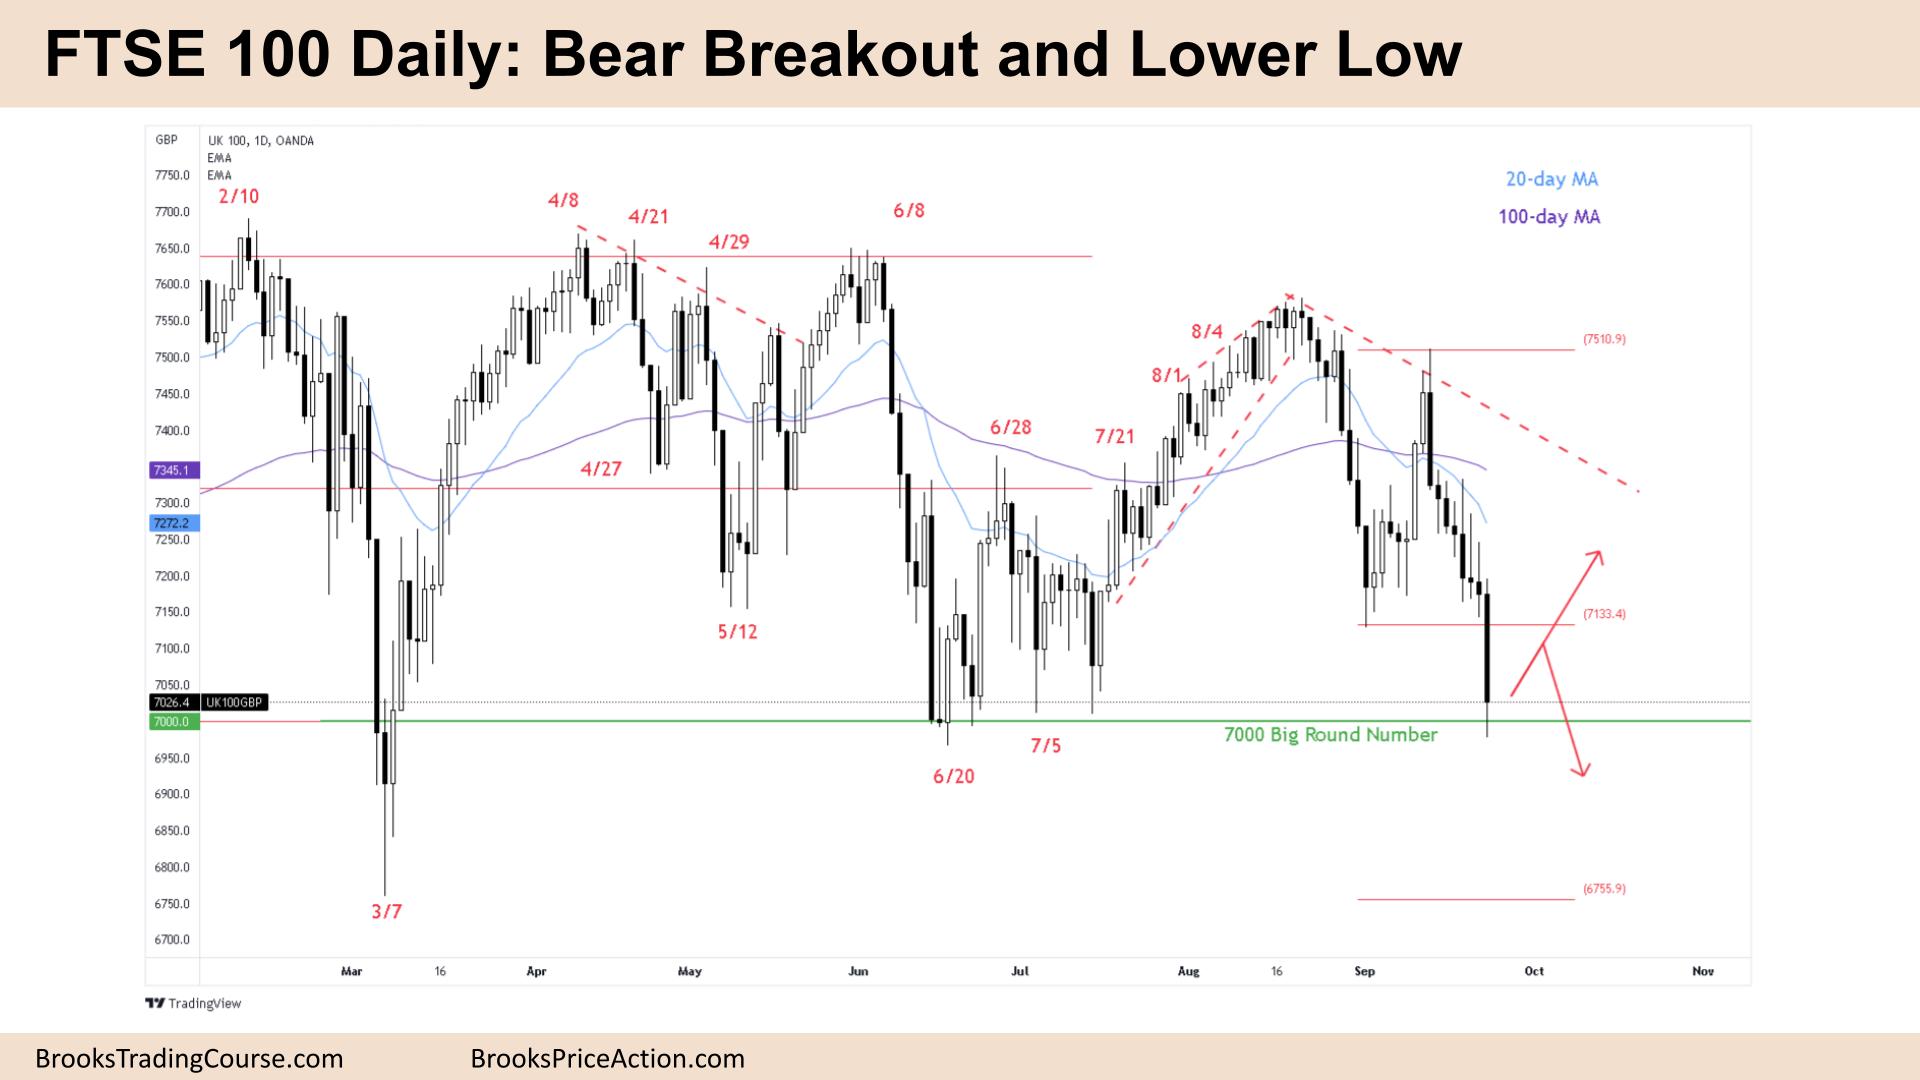 FTSE 100 Daily Bear Breakout and Lower Low